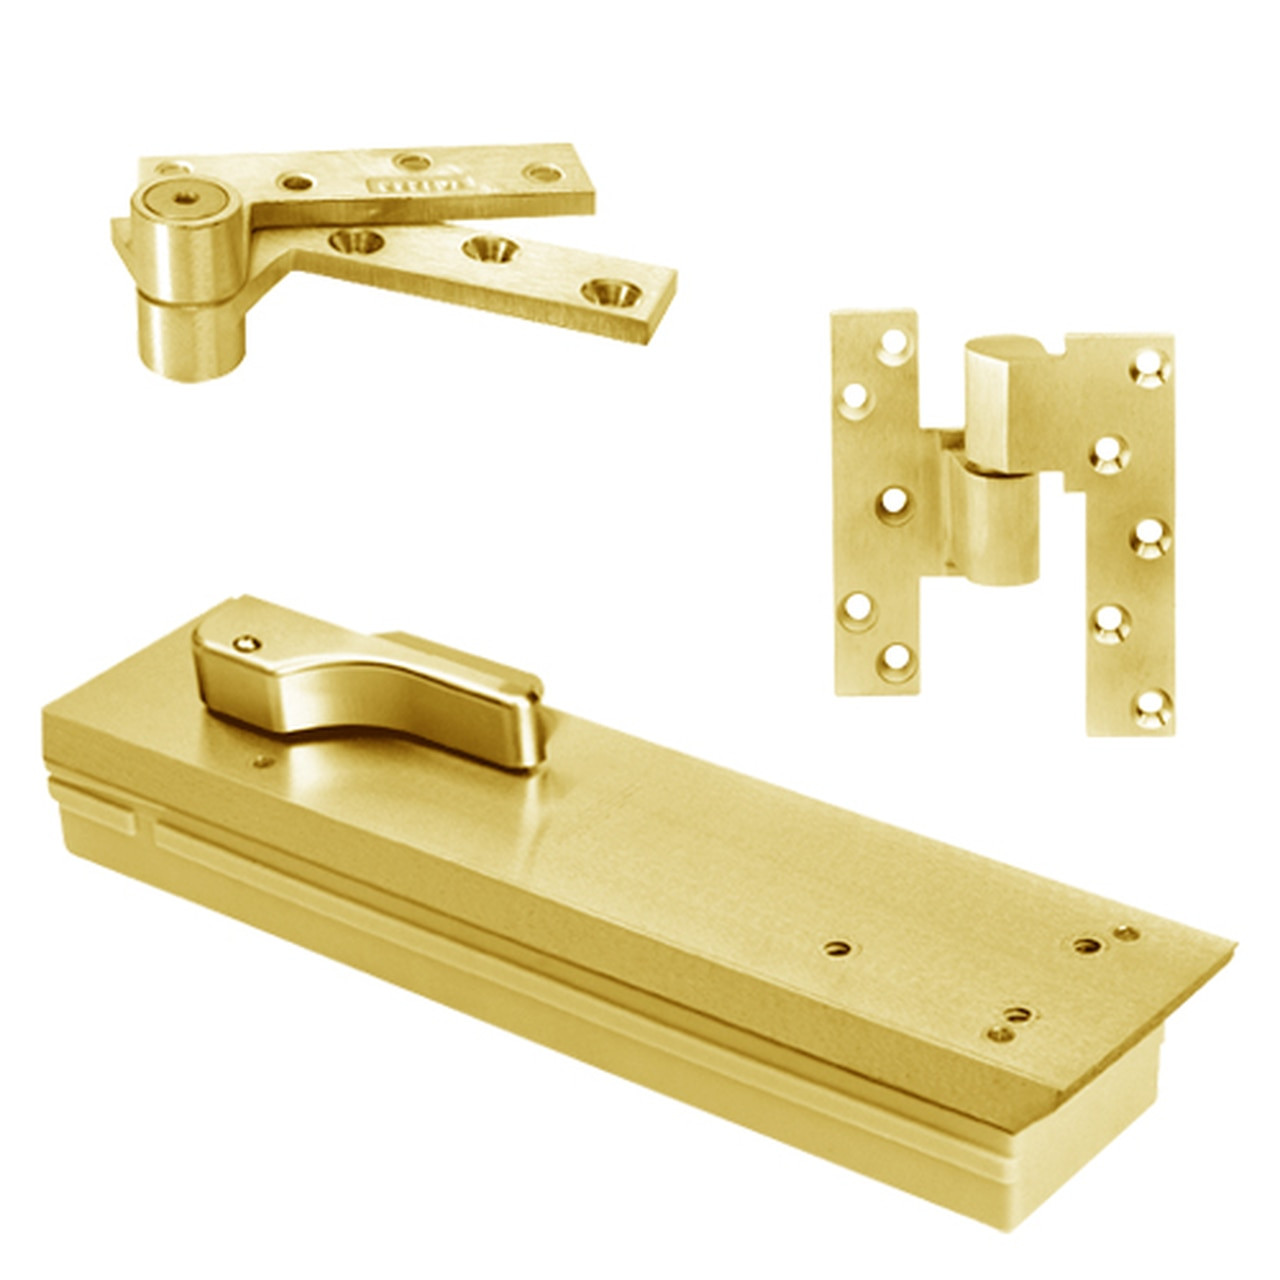 FQ5104NBC-SC-RH-605 Rixson Q51 Series Fire Rated 3/4" Offset Hung Shallow Depth Floor Closers in Bright Brass Finish